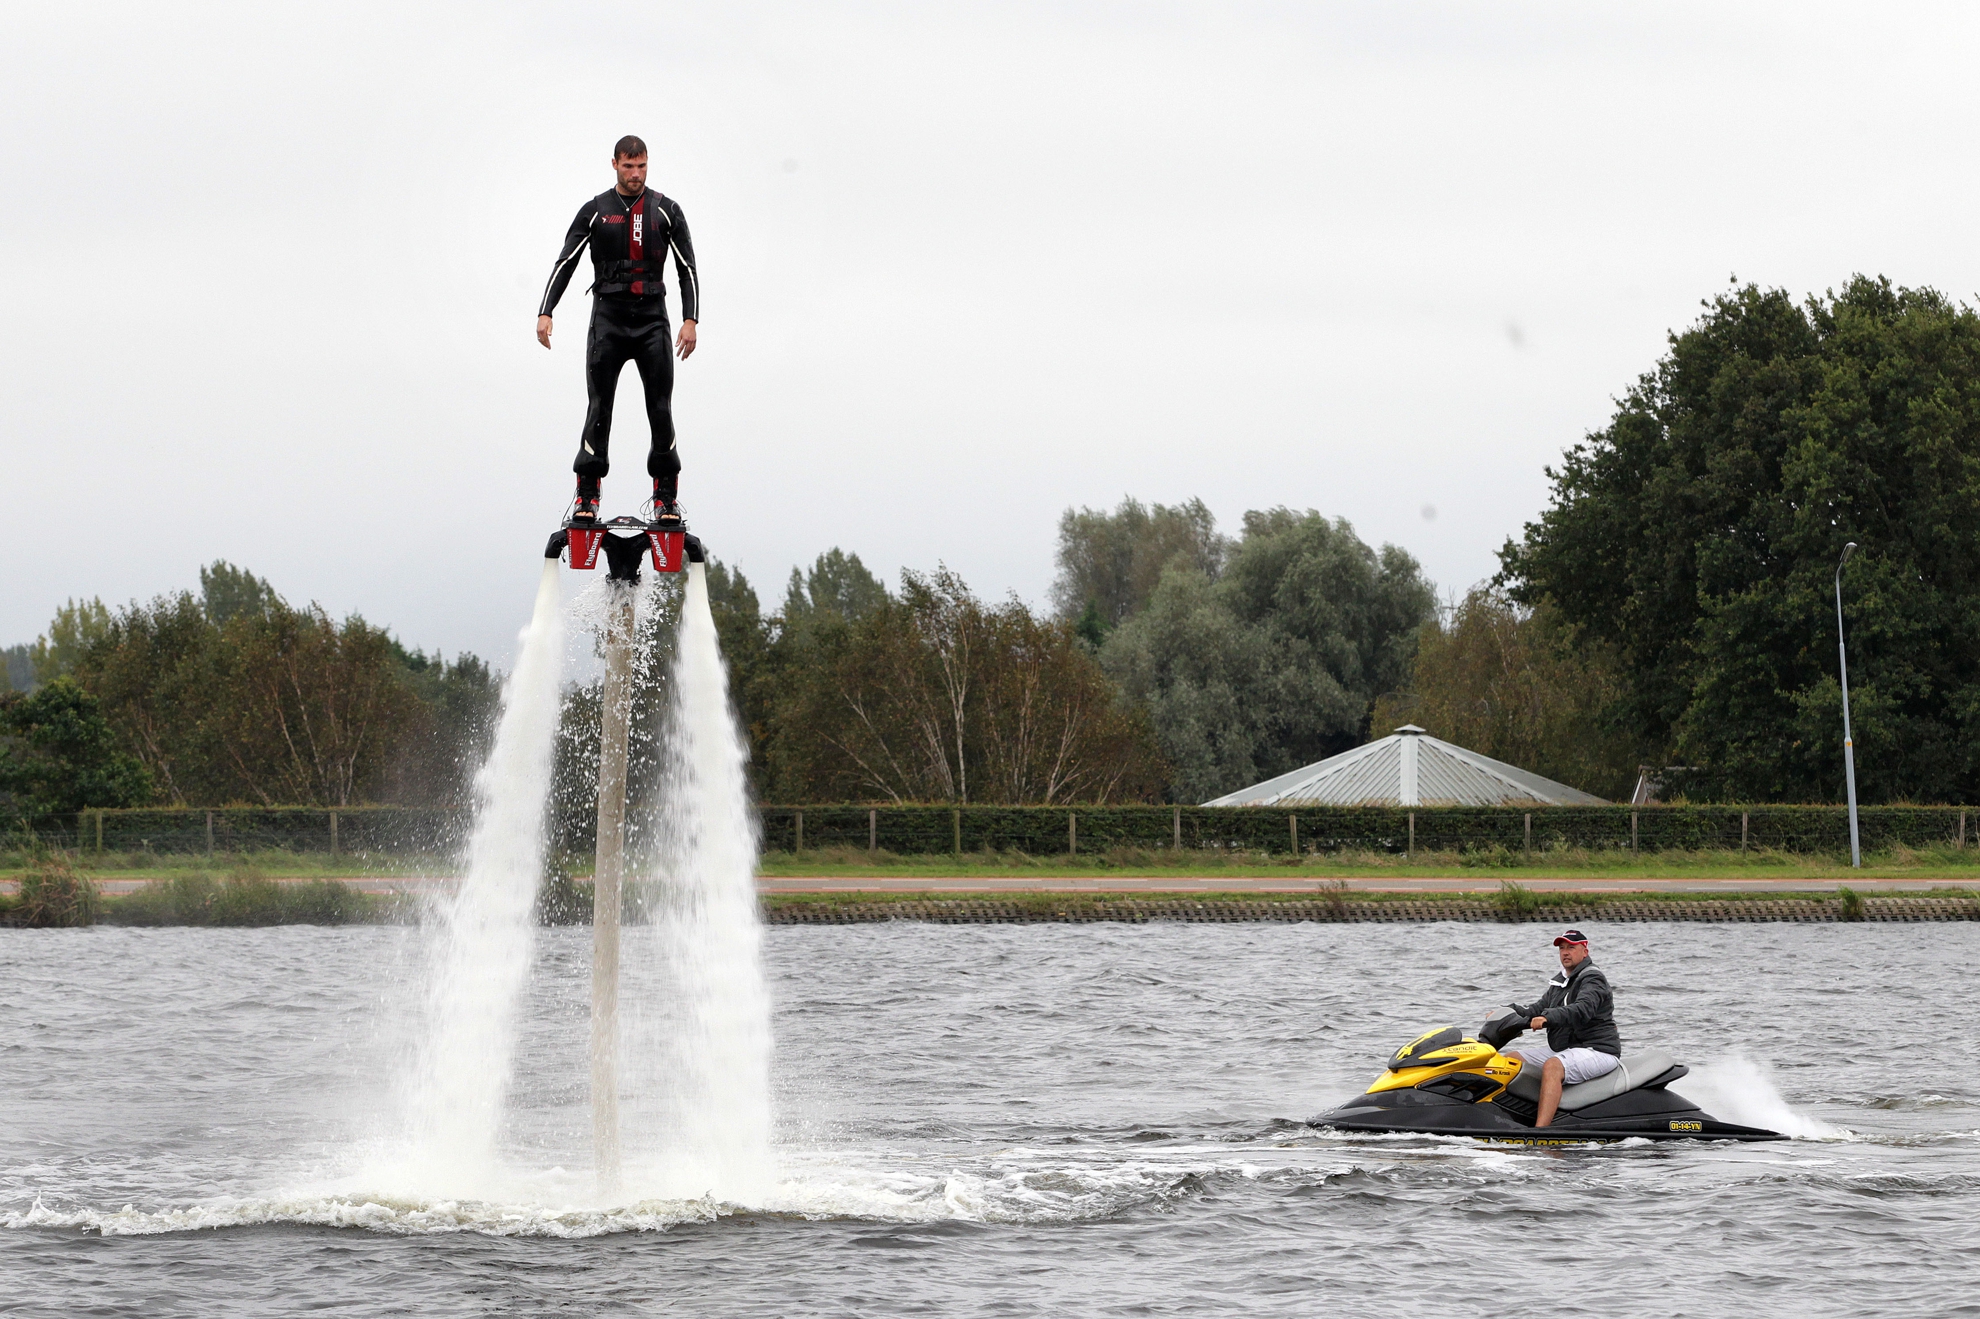 BMW DTM drivers kick off Zandvoort weekend with a flyboard training session